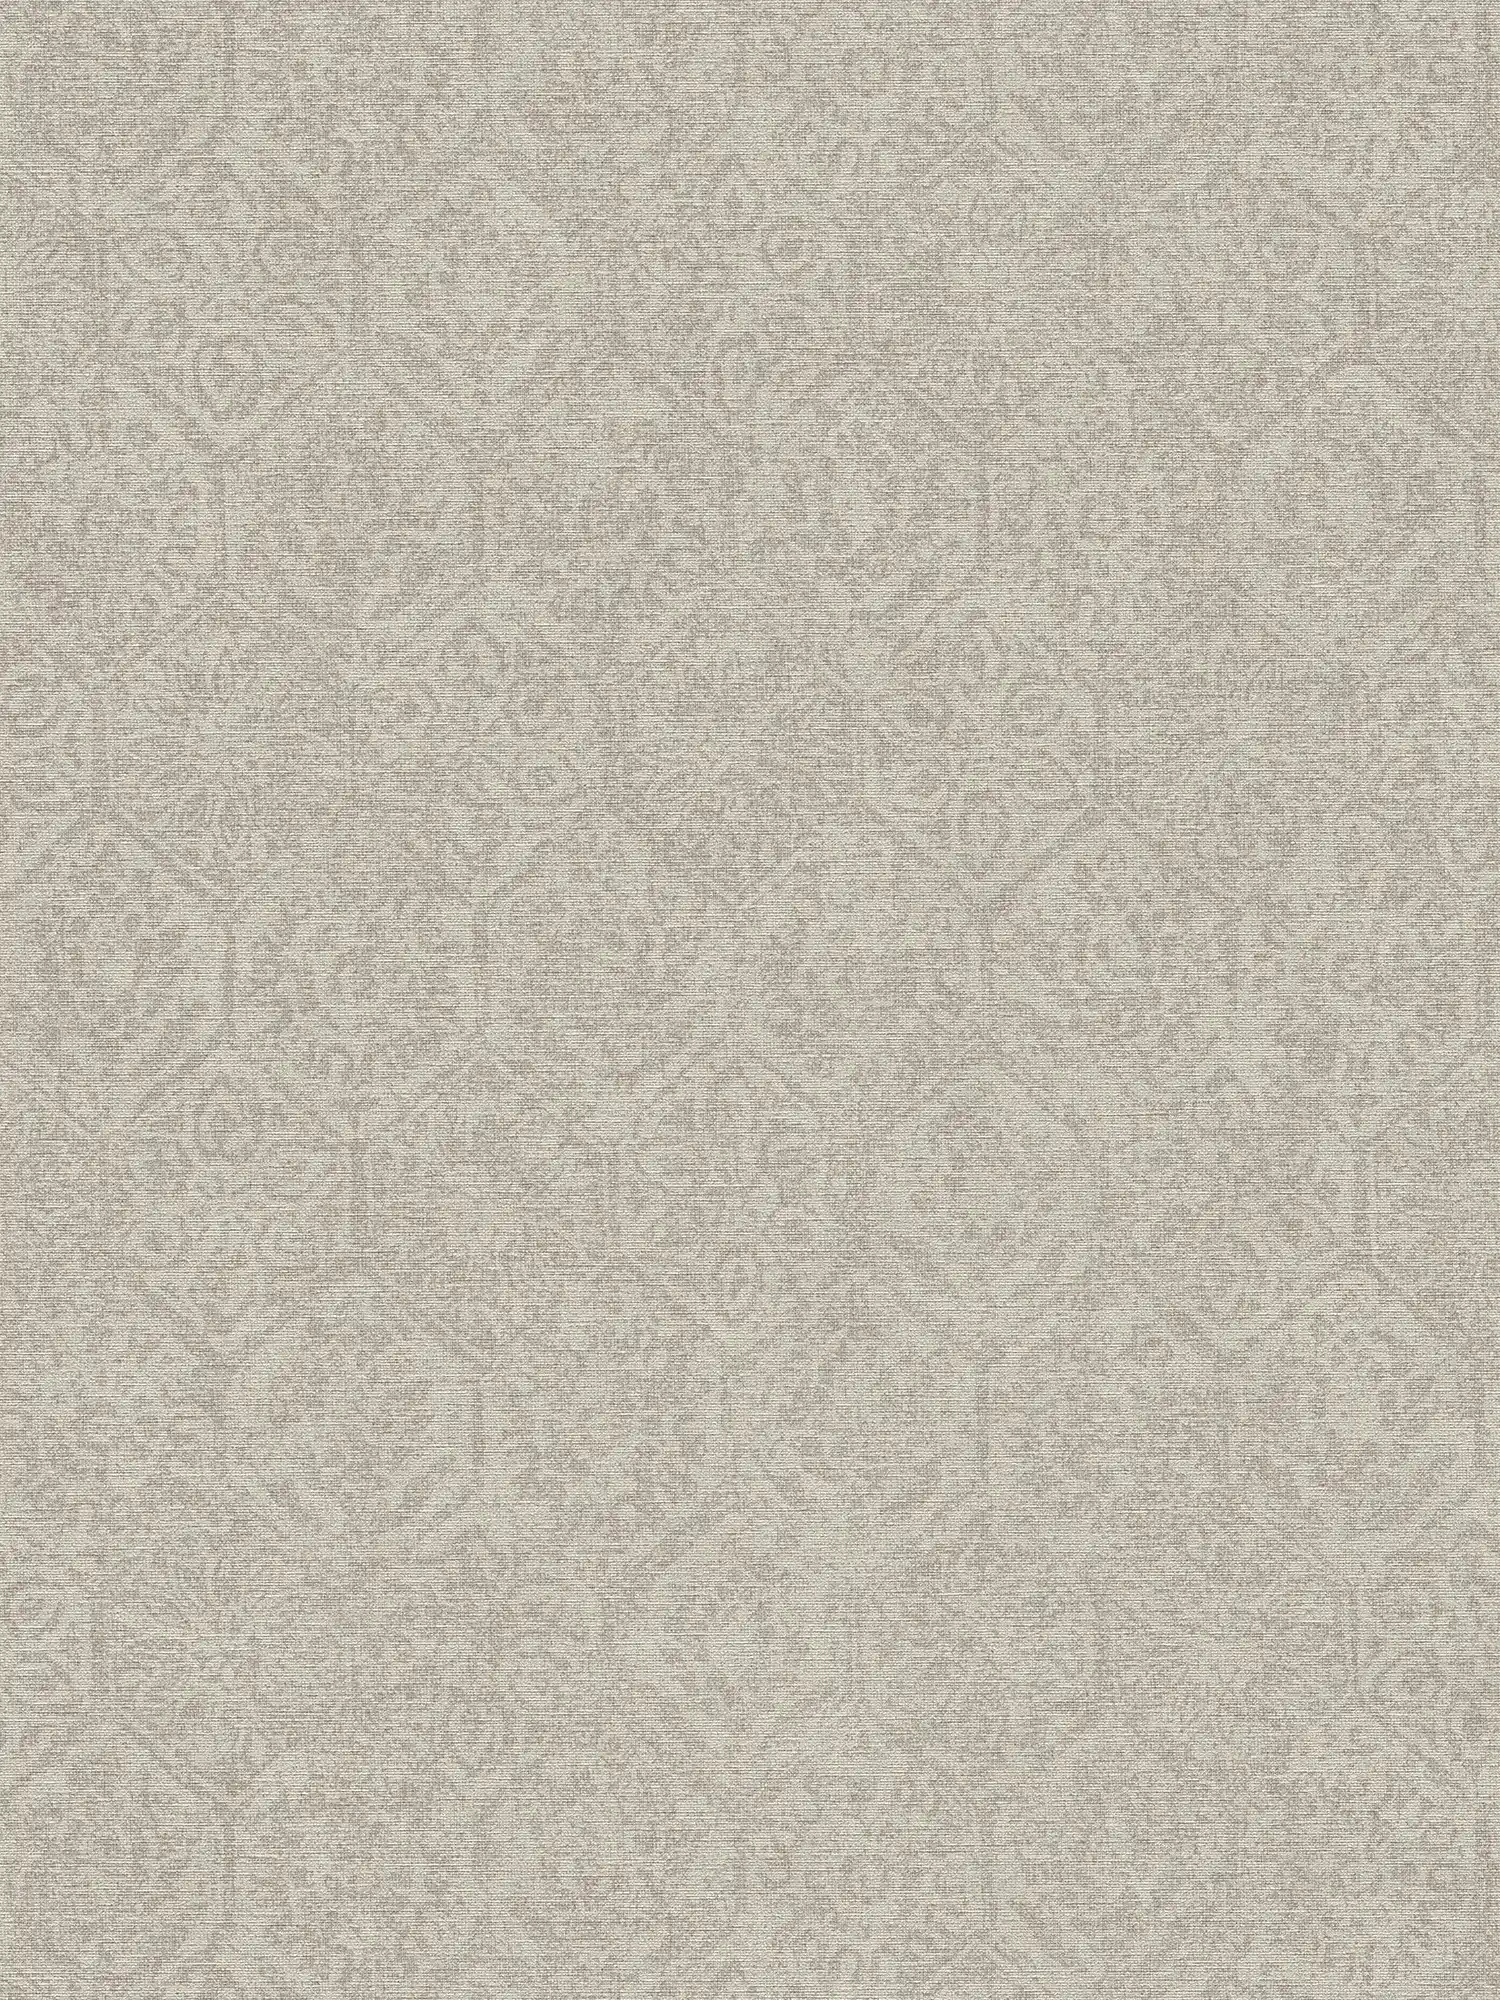 Wallpaper brown with used look decor in vintage style - brown
